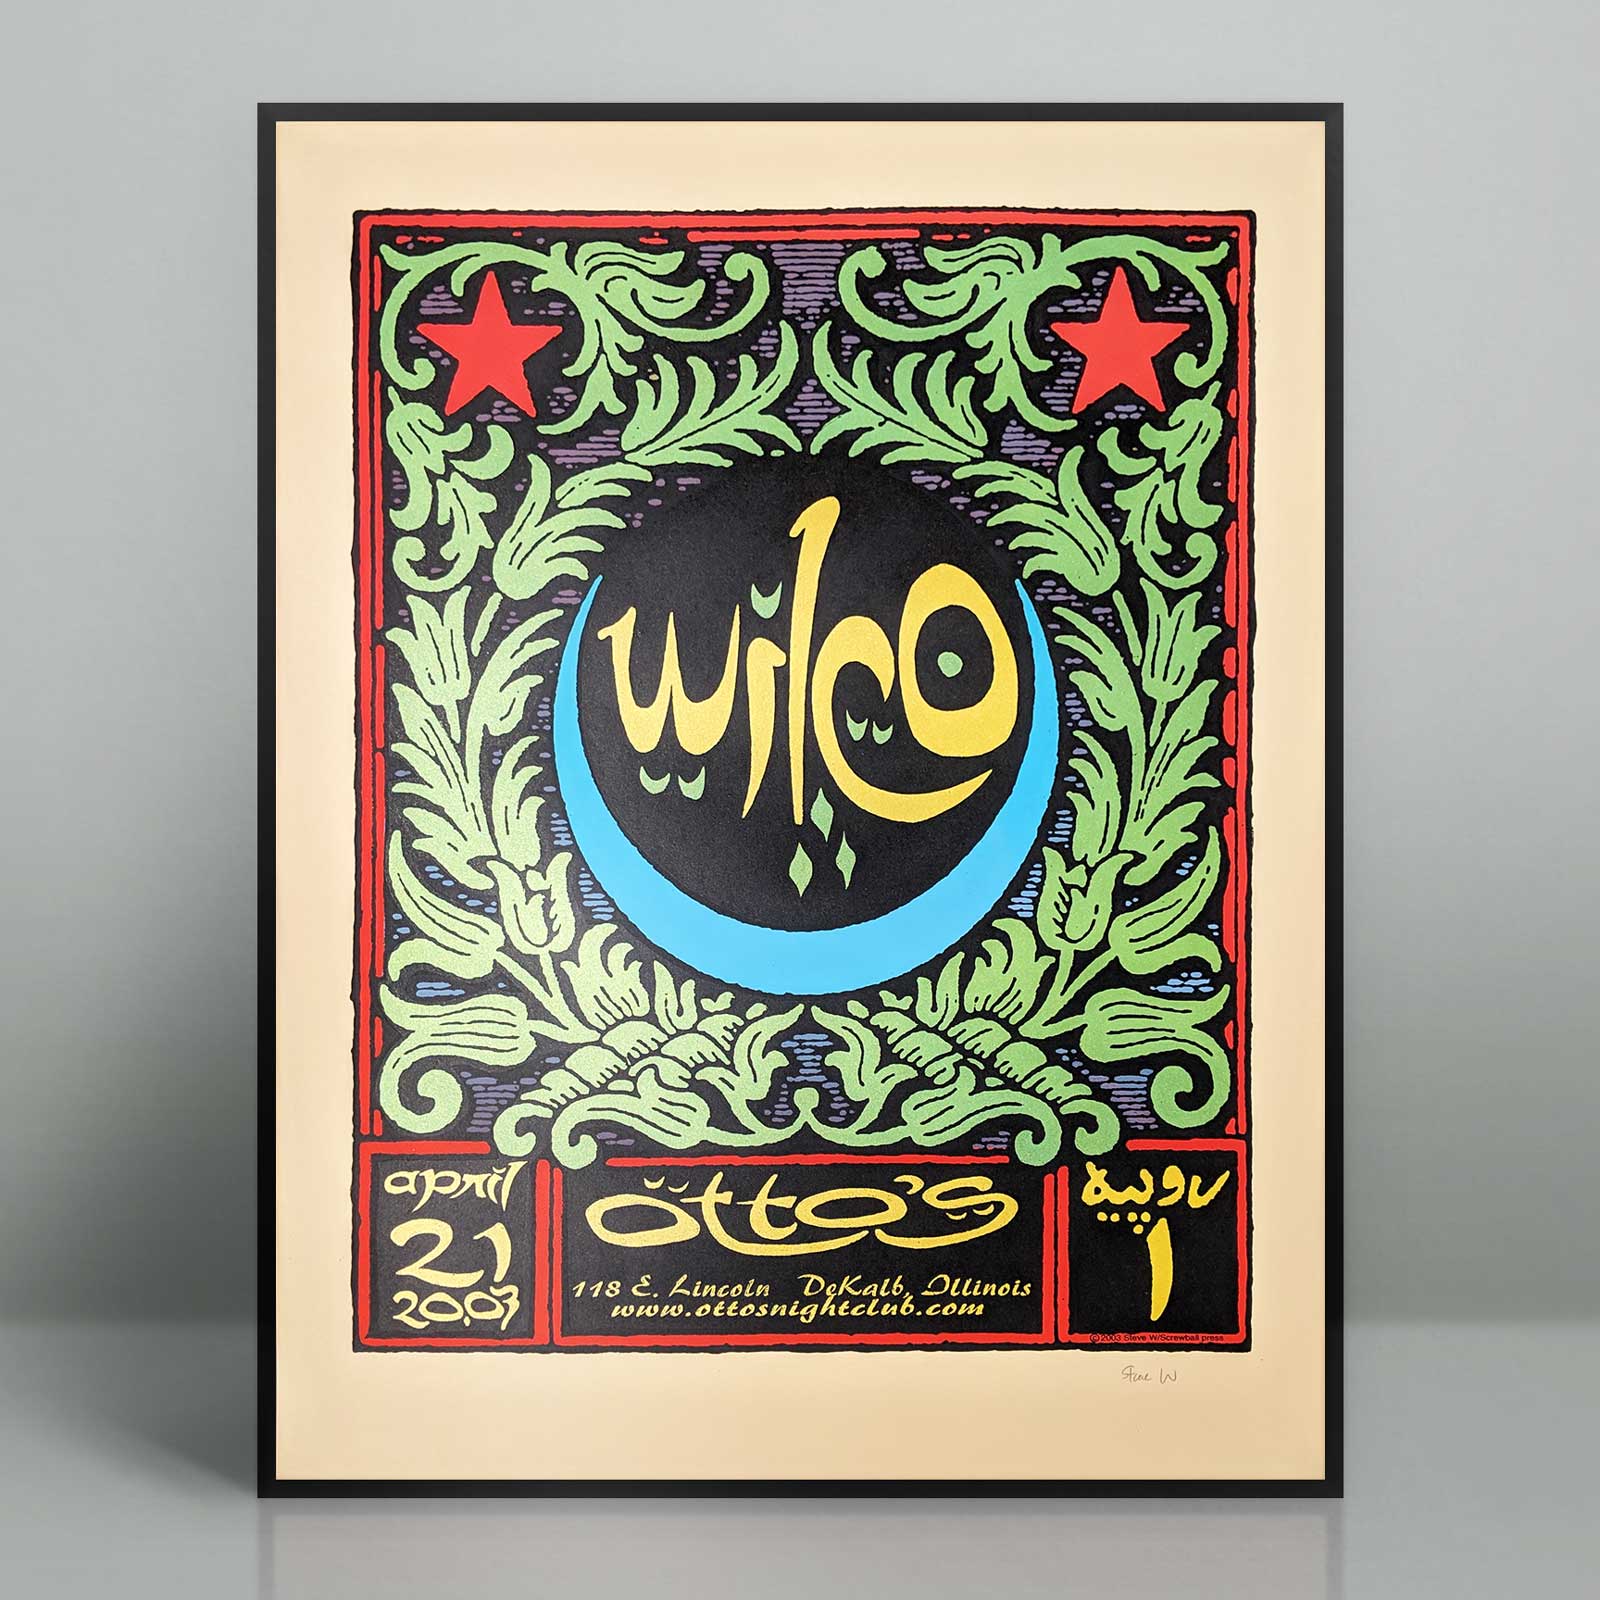 Hand silk screened Wilco concert poster for the April 21st, 2003 performance at Otto's in DeKalb, Illinois. Designed and printed by our friend Steve Walters of Screwball Press.